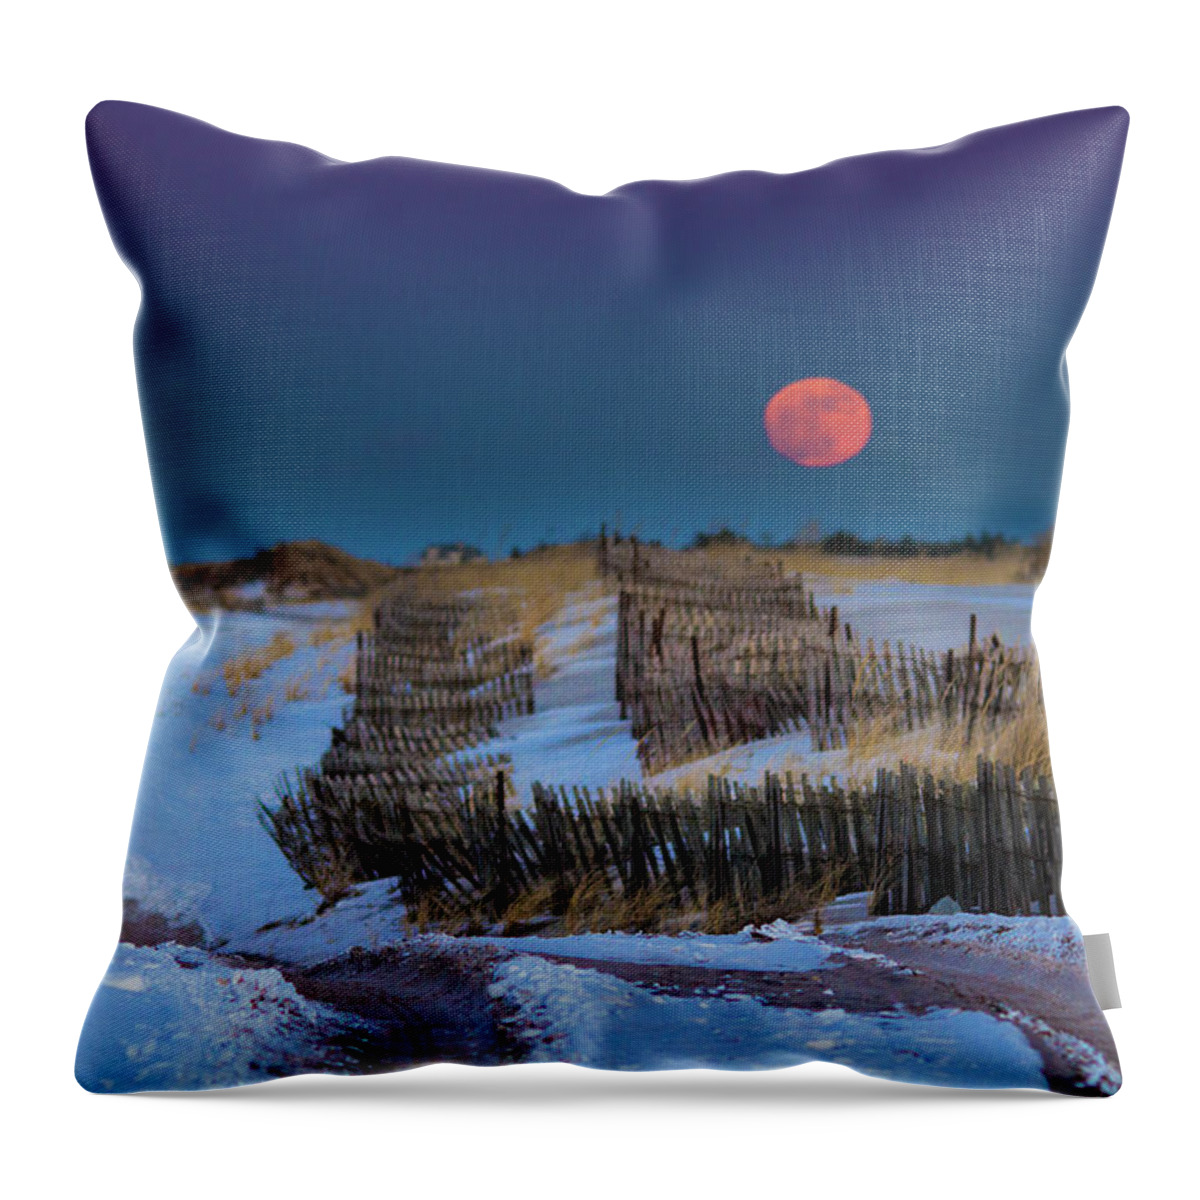 Moon Moonrise Cupsogue Beach Moriches Inlet Tide Jeep Off Road Fence Westhampton New York Ny Long Island Hampton Hamptons Sand East Coast Coastal Atlantic Ocean Throw Pillow featuring the photograph Moonrise Cupsogue Outer Beach by Robert Seifert